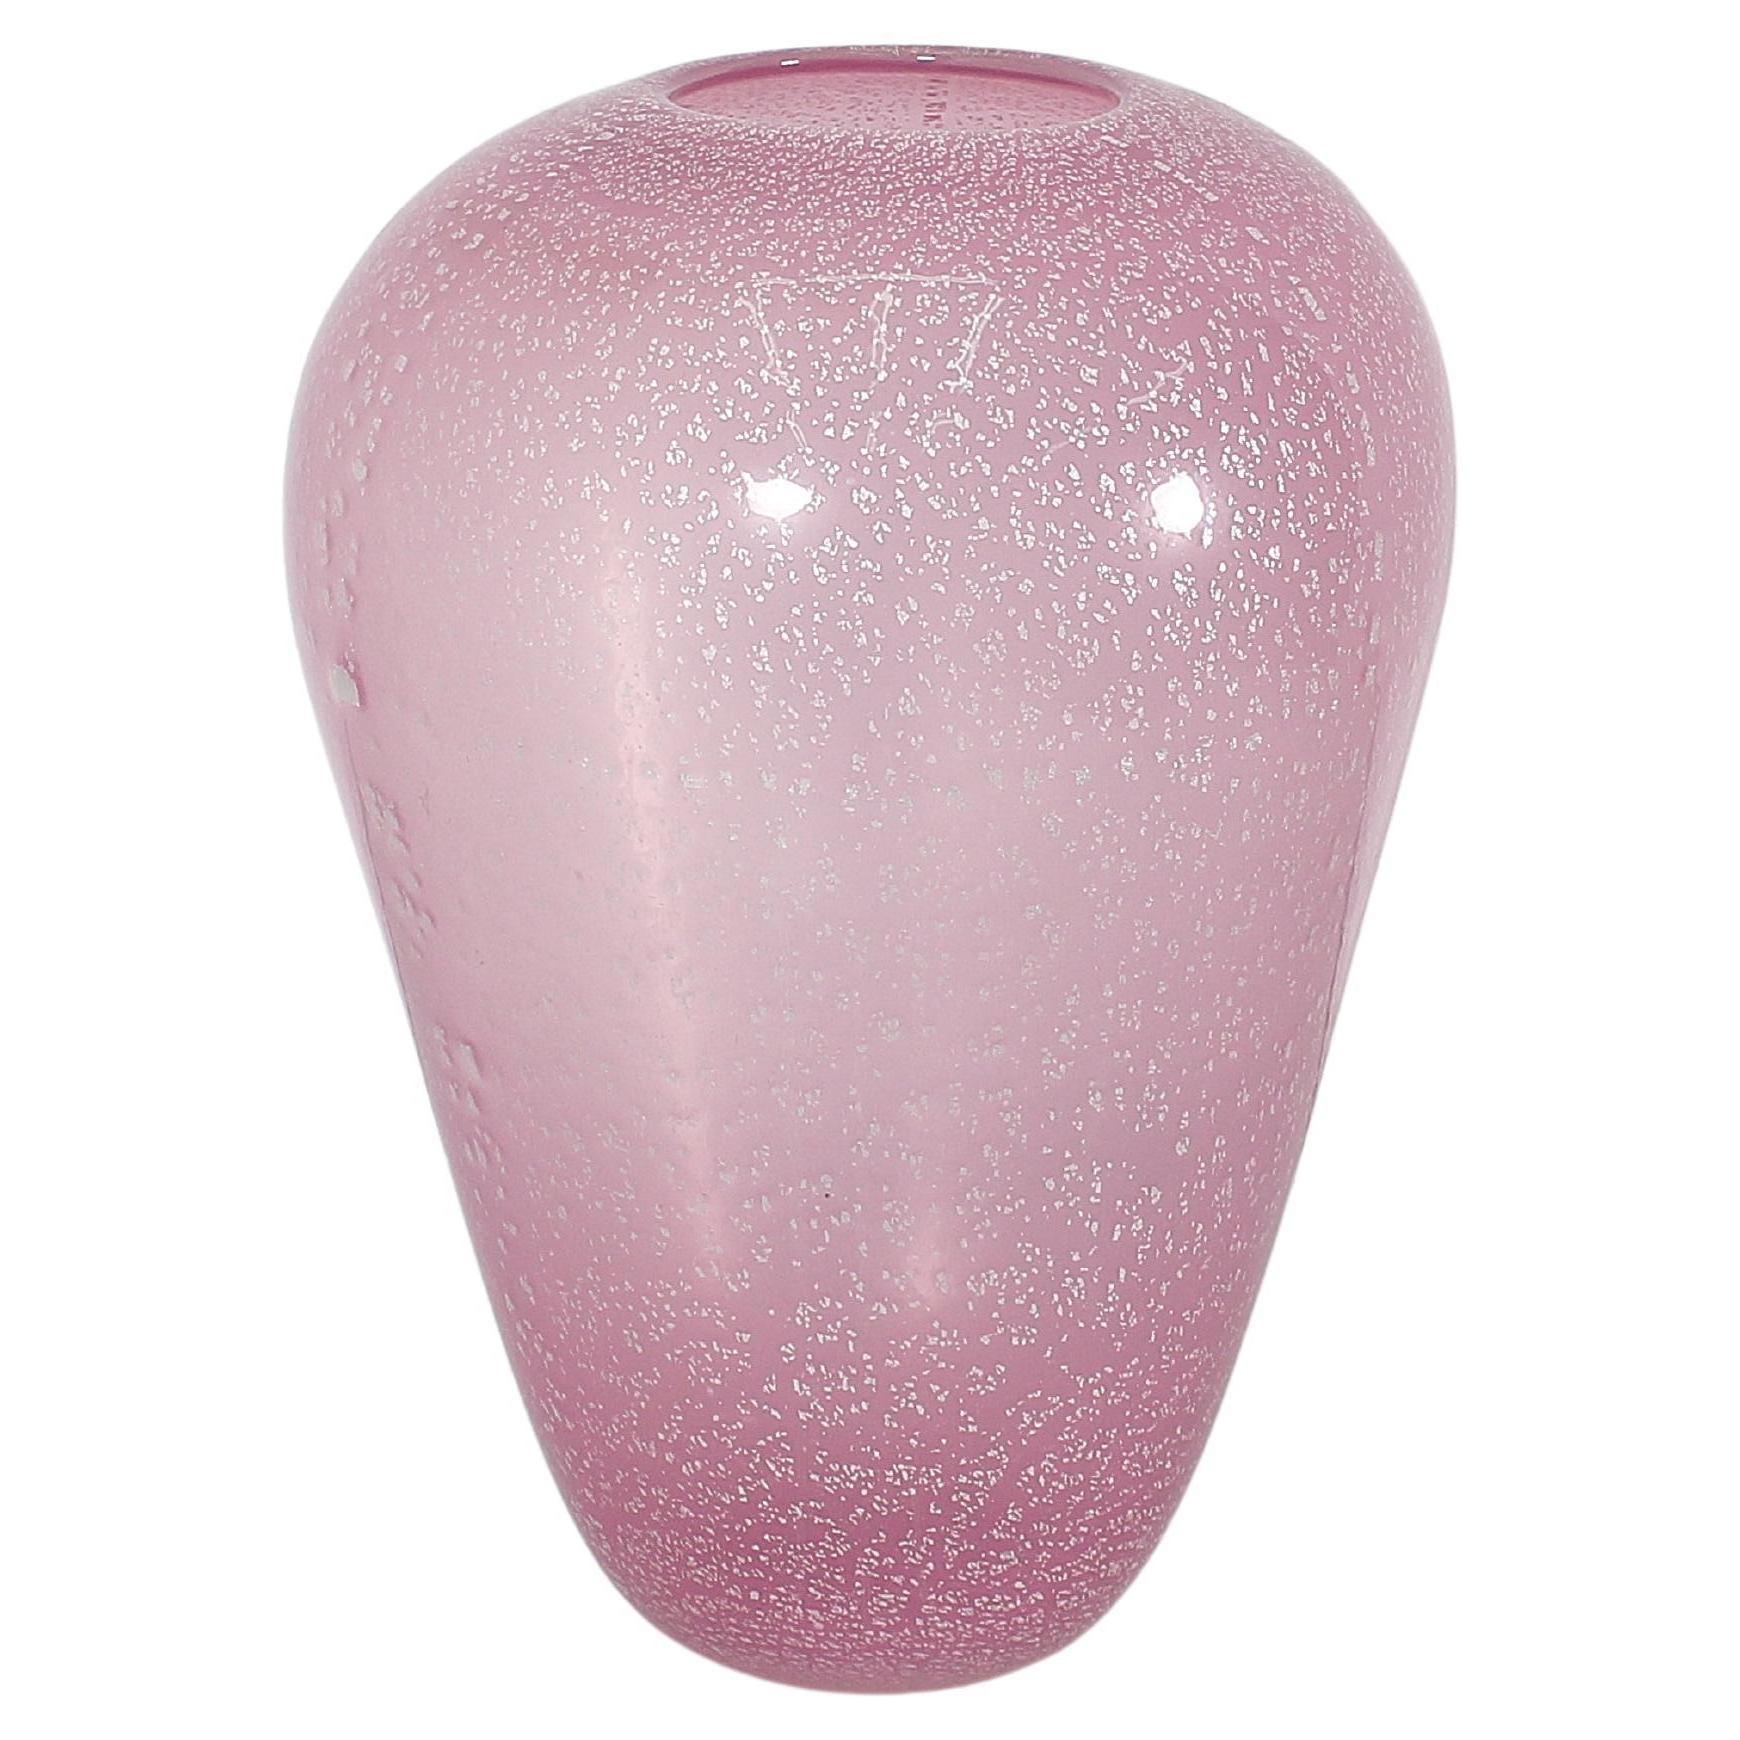 Midcentury Barovier & Toso Pink Murano Glass Vase with Silver Leaf 70s Italy For Sale